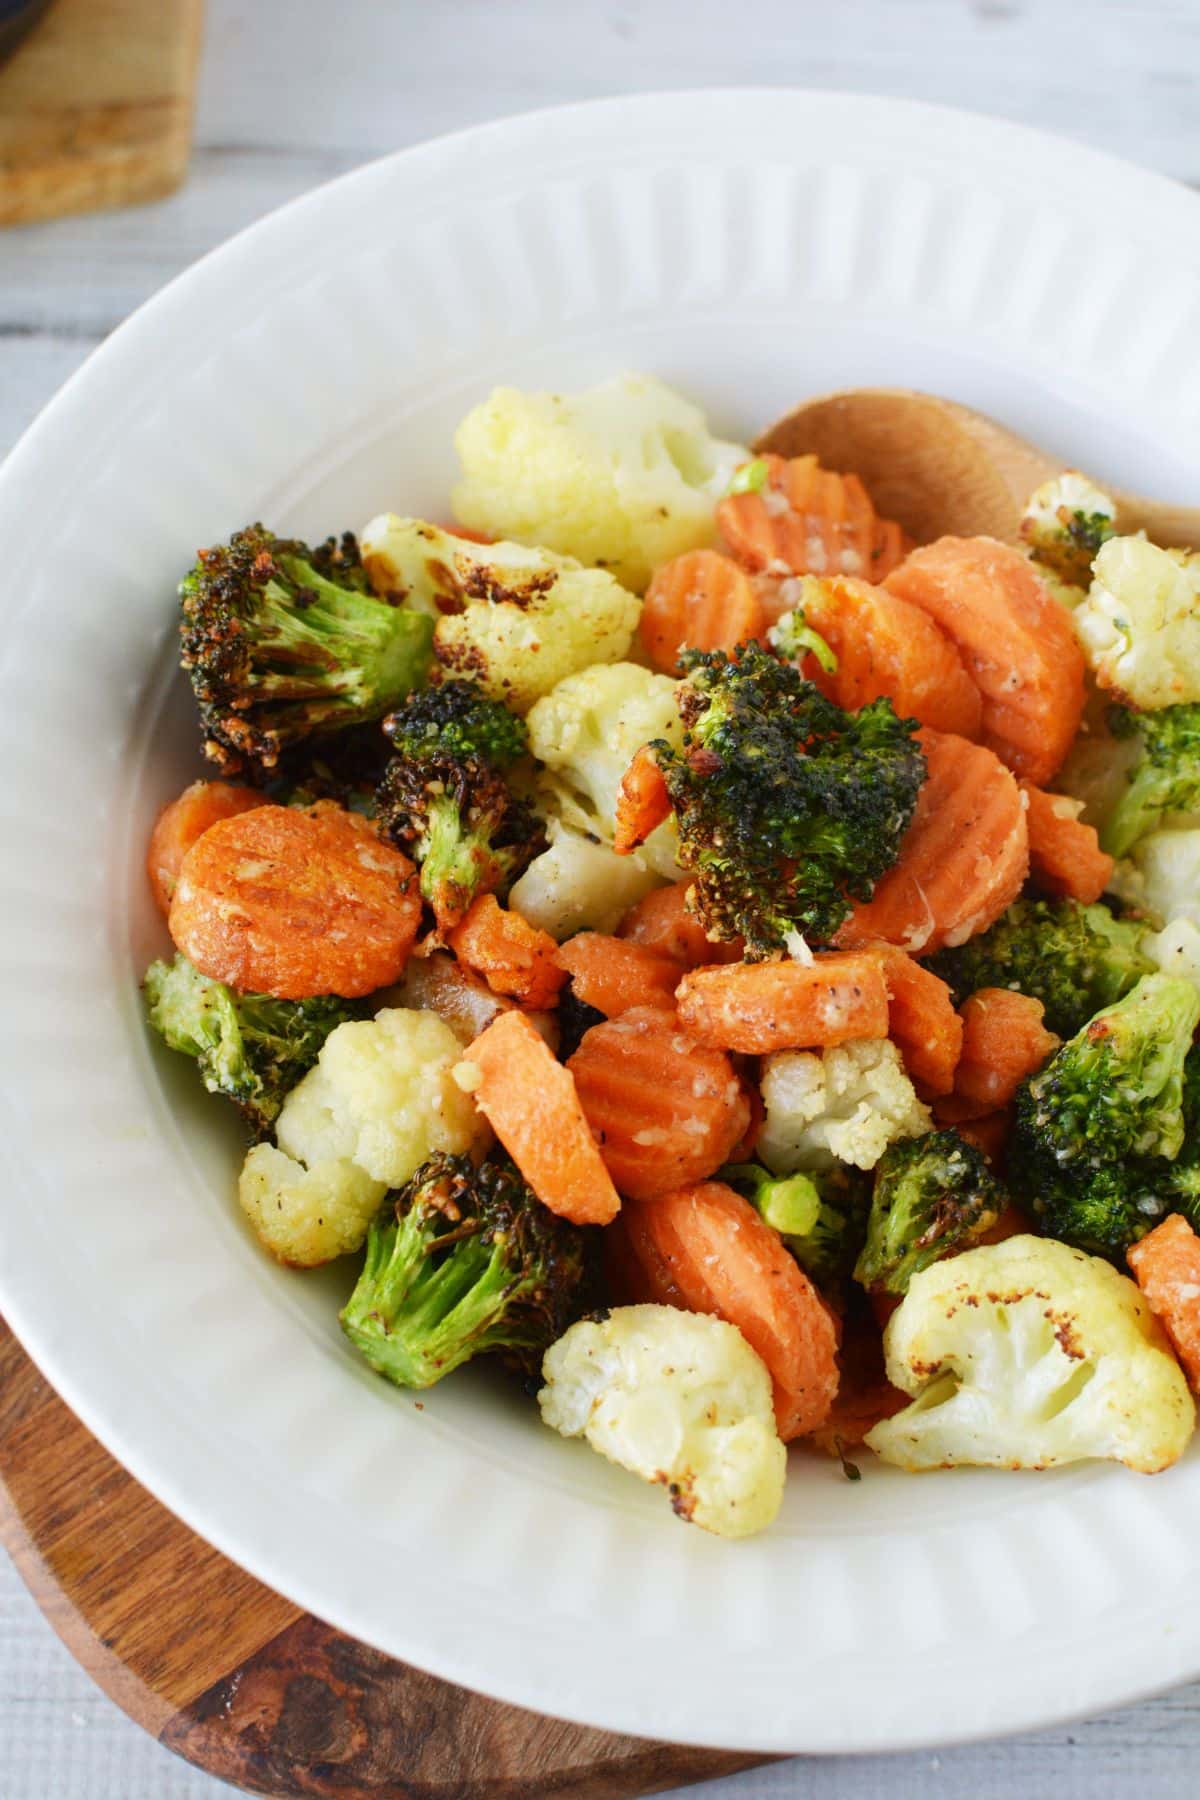 bowl of vegetables including broccoli cauliflower and carrots